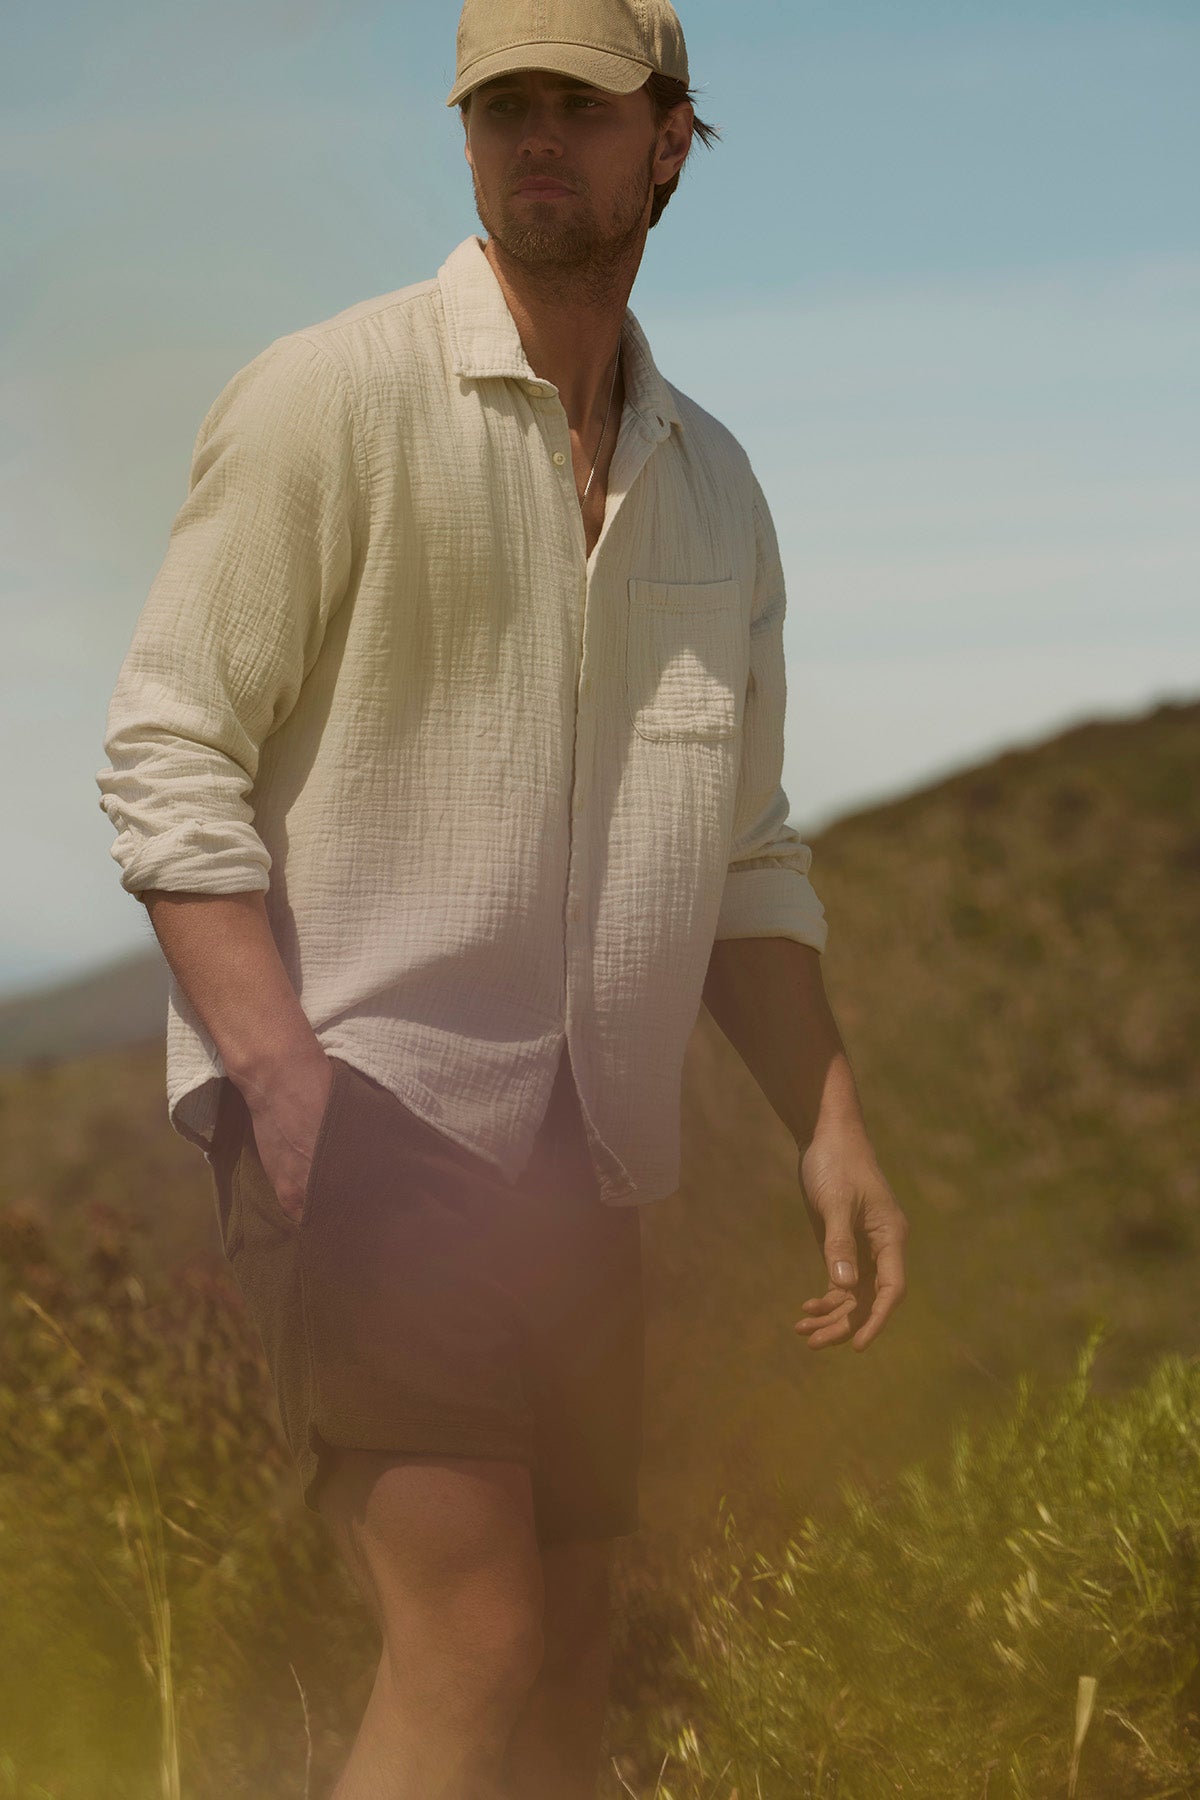   A man in an Elton Cotton Gauze button-up shirt and shorts stands in a sunny field, with a thoughtful expression and tousled hair, gazing into the distance. 